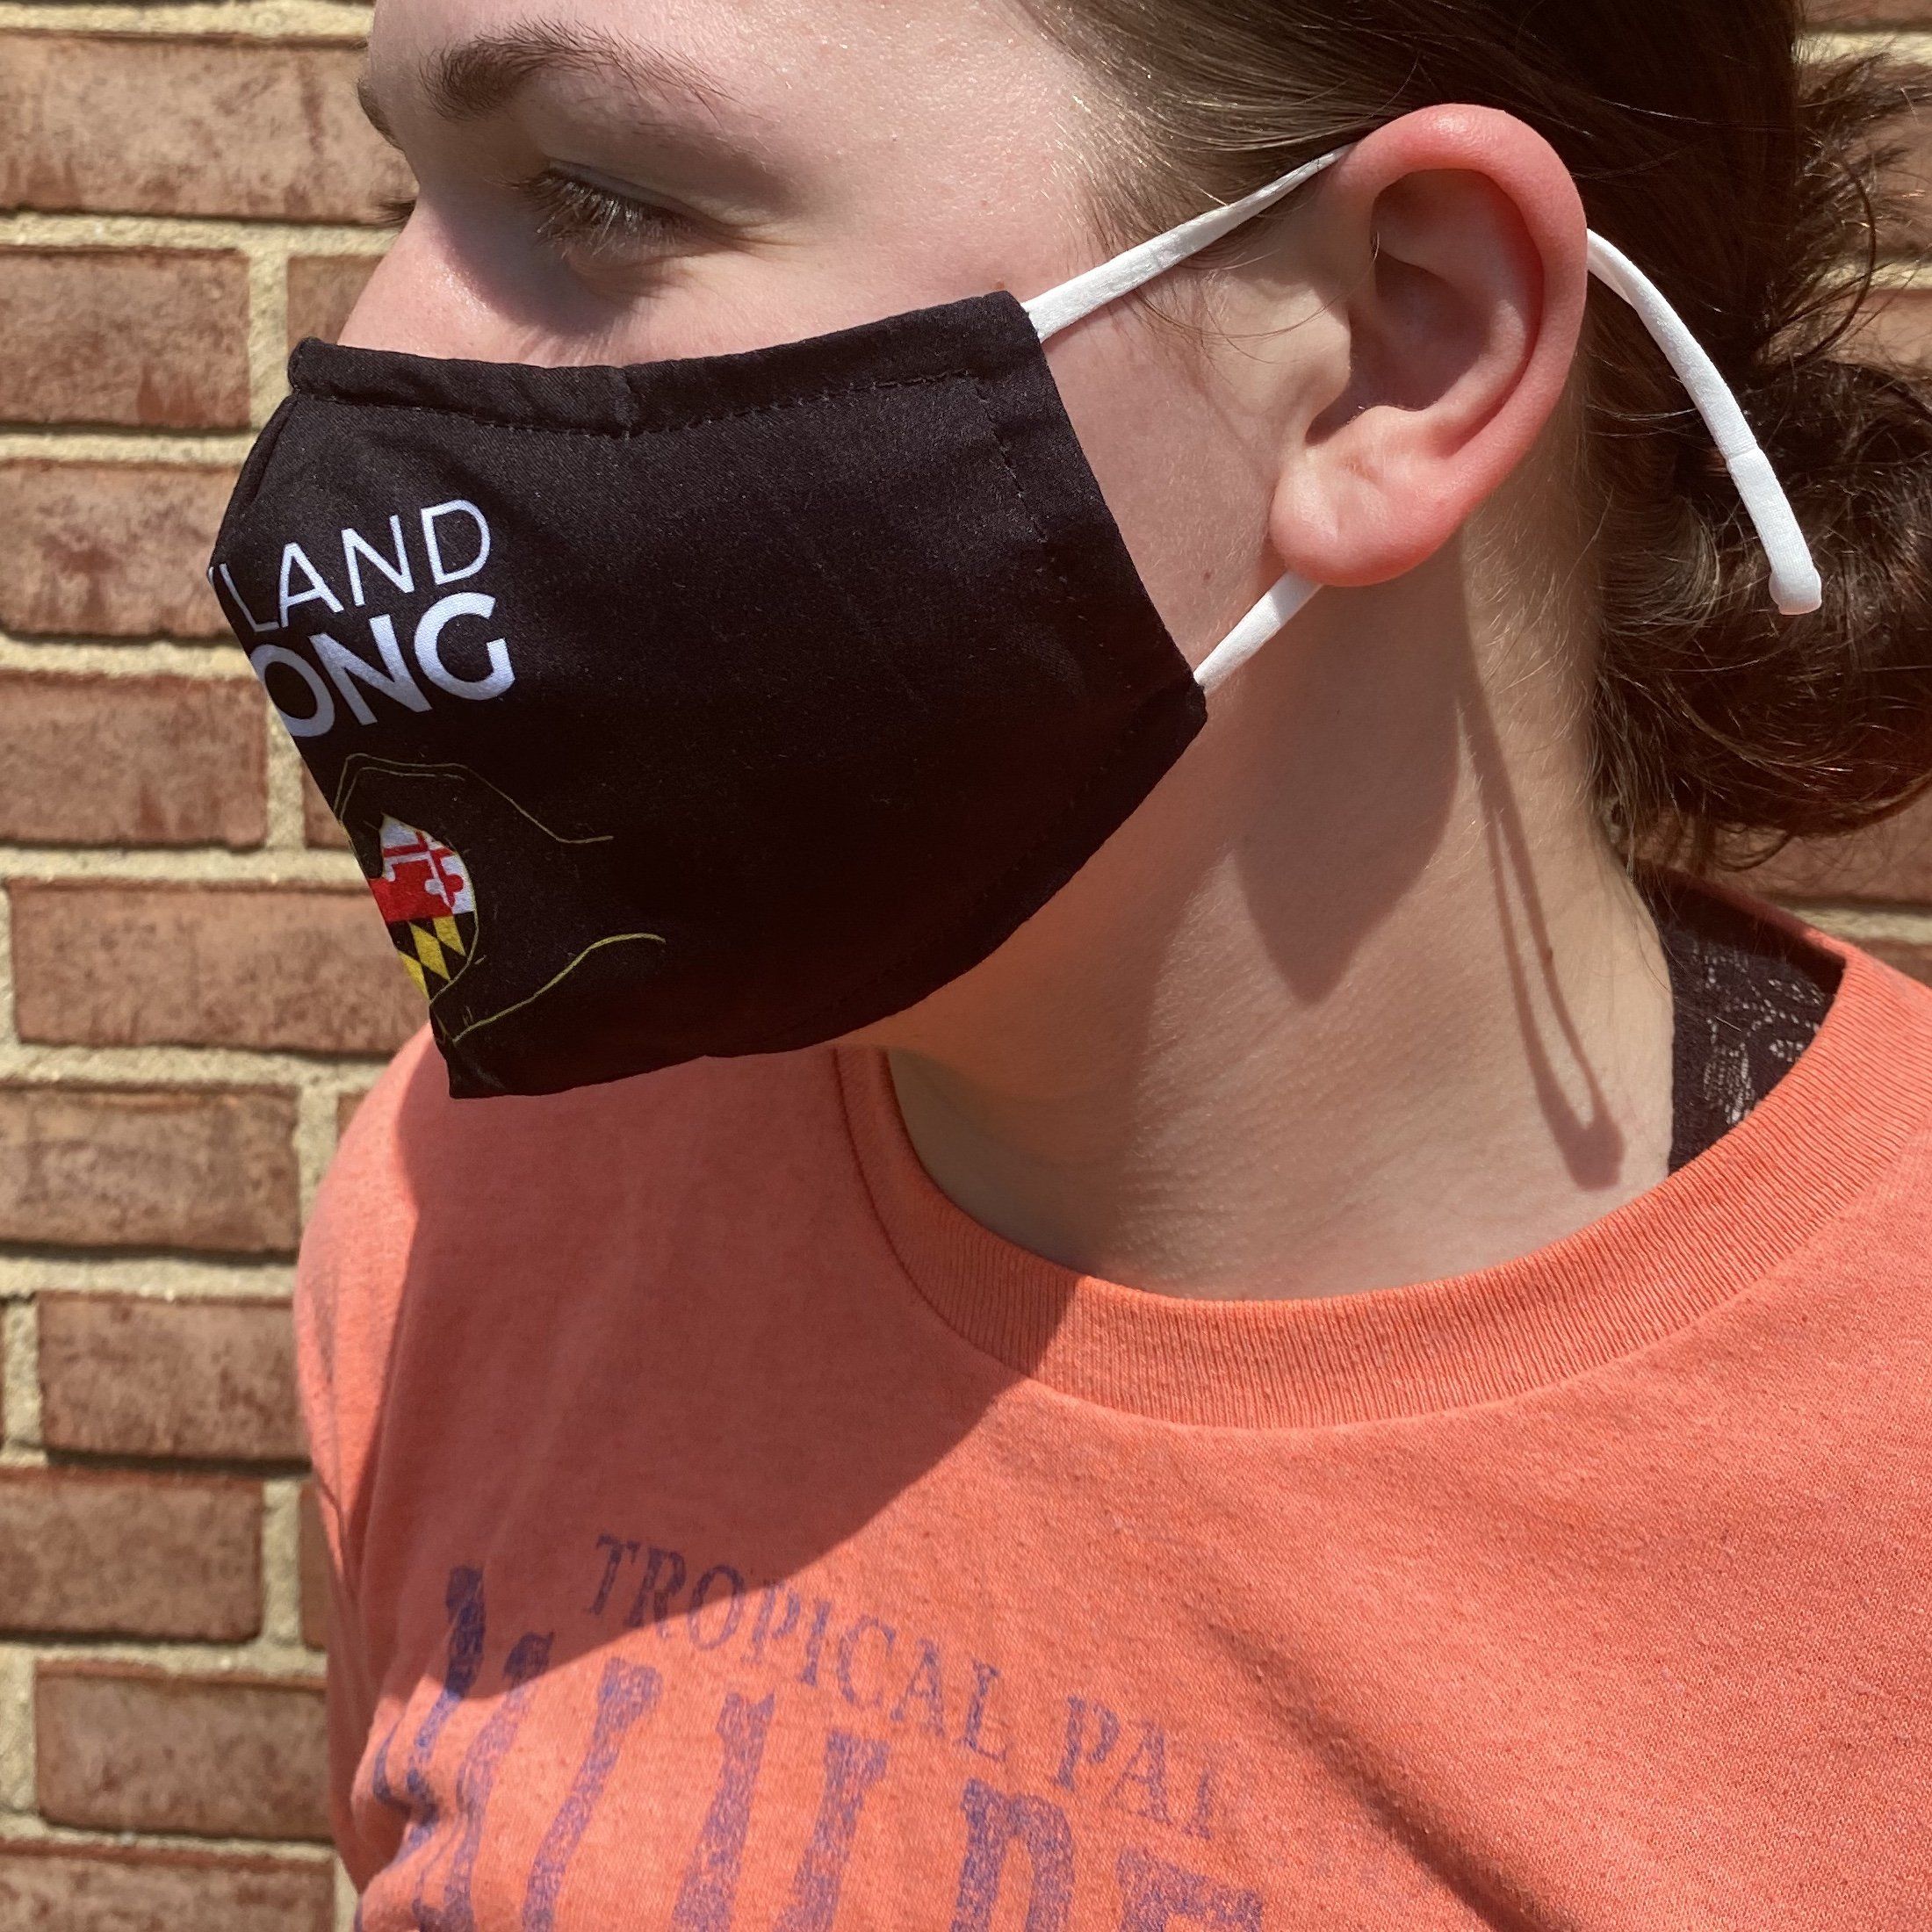 Maryland Strong (Black) / Face Mask - Route One Apparel